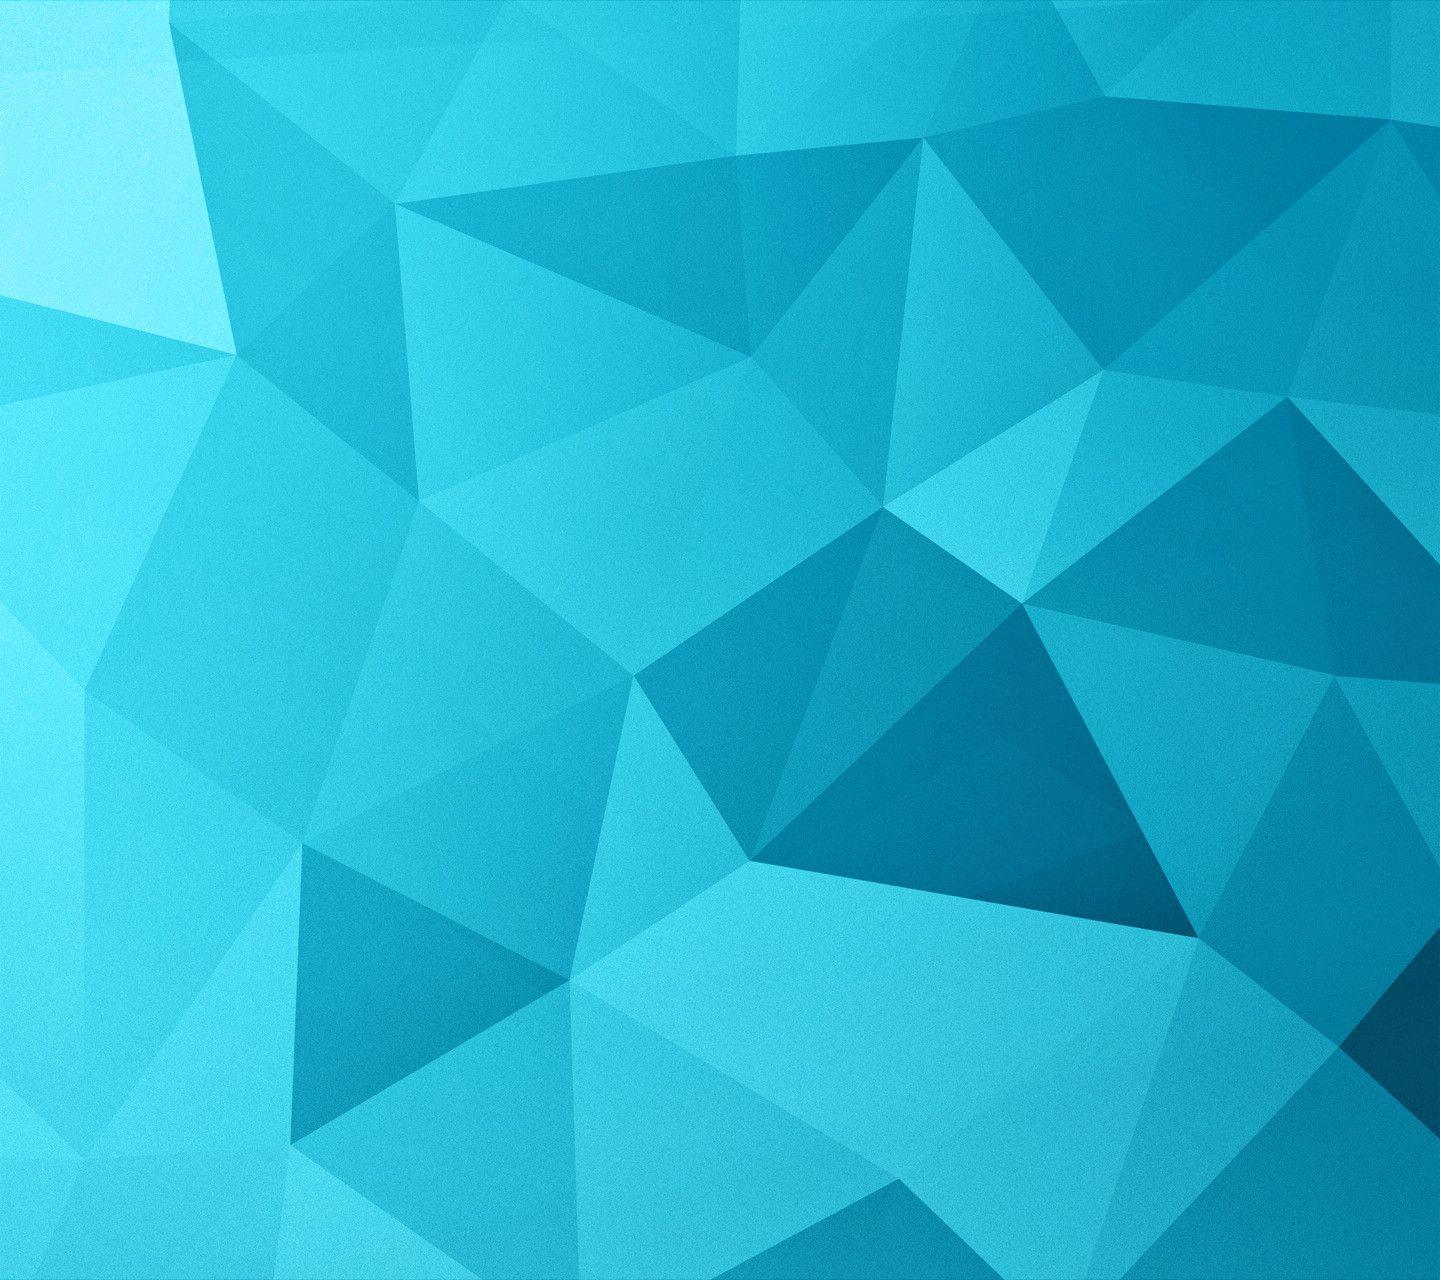 Download: Two New Wallpapers From the New Nexus 7